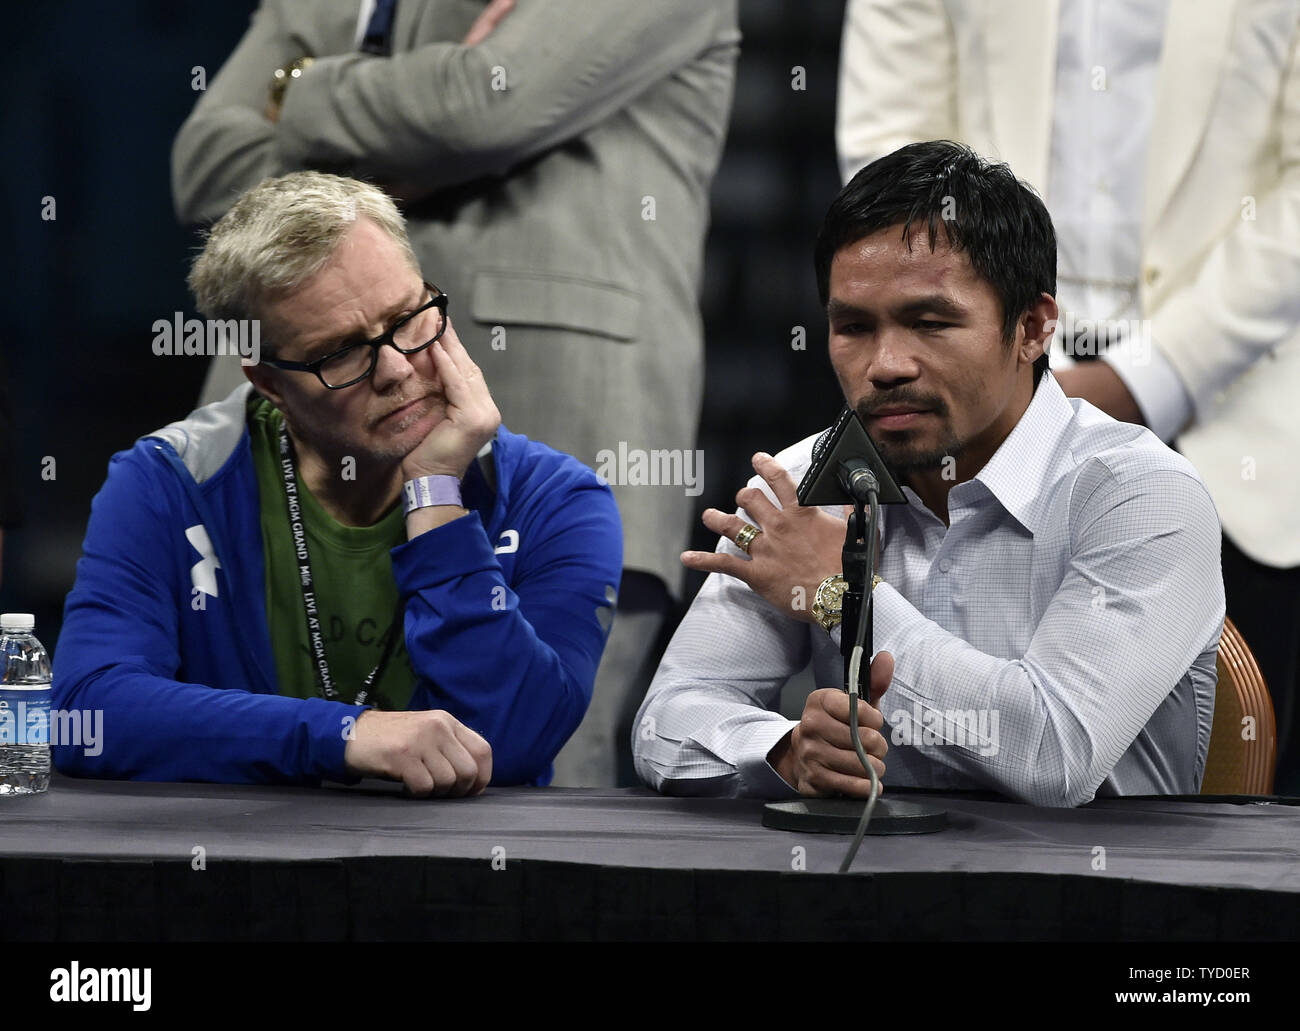 Manny Paciquiao, right, holds his shoulder as his trainer, Freddie Roach, looks on during a news conference after his welterweight unification bout against Floyd Mayweather Jr. at MGM Grand Garden Arena Saturday, May 2, 2015, in Las Vegas, Nevada. Mayweather won with an unanimous decision after the 12 round fight. Photo by David Becker/UPI Stock Photo